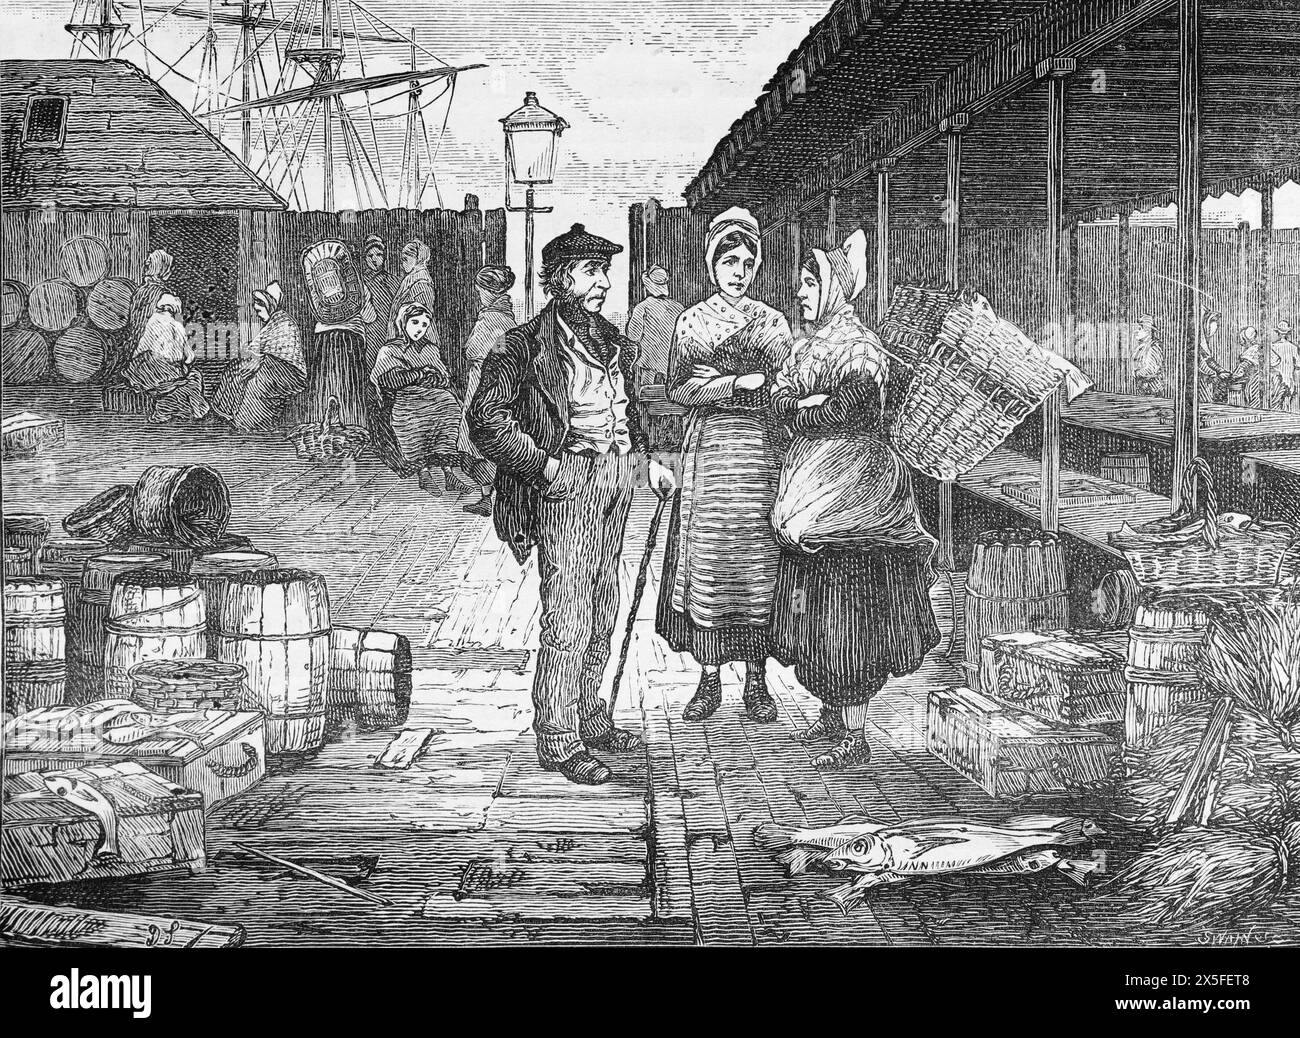 The Fish Market in Aberdeen in the 19th century. Black and White Illustration from Our Own Country Vol III published by Cassell, Petter, Galpin & Co. in the late 19th century. Stock Photo